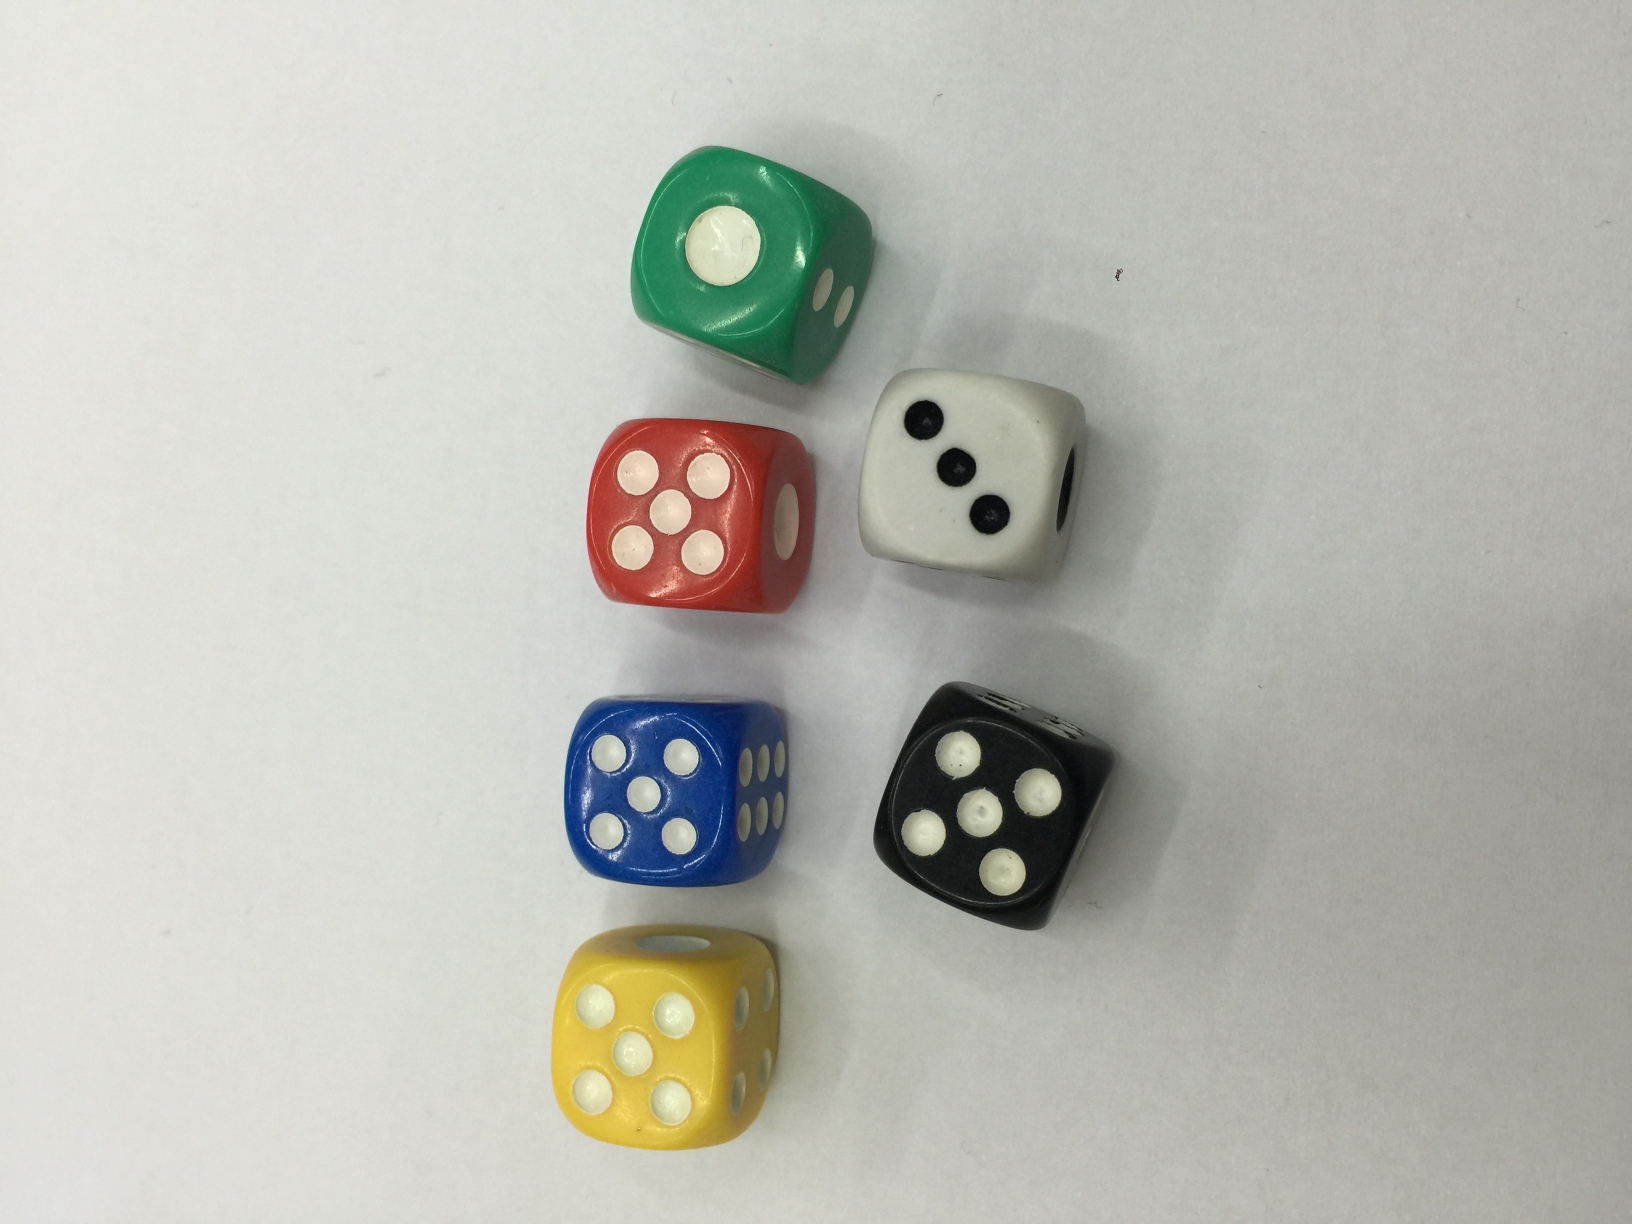 【Yiwu Haonan Sports】 Supply 14 # color dice a variety of colors